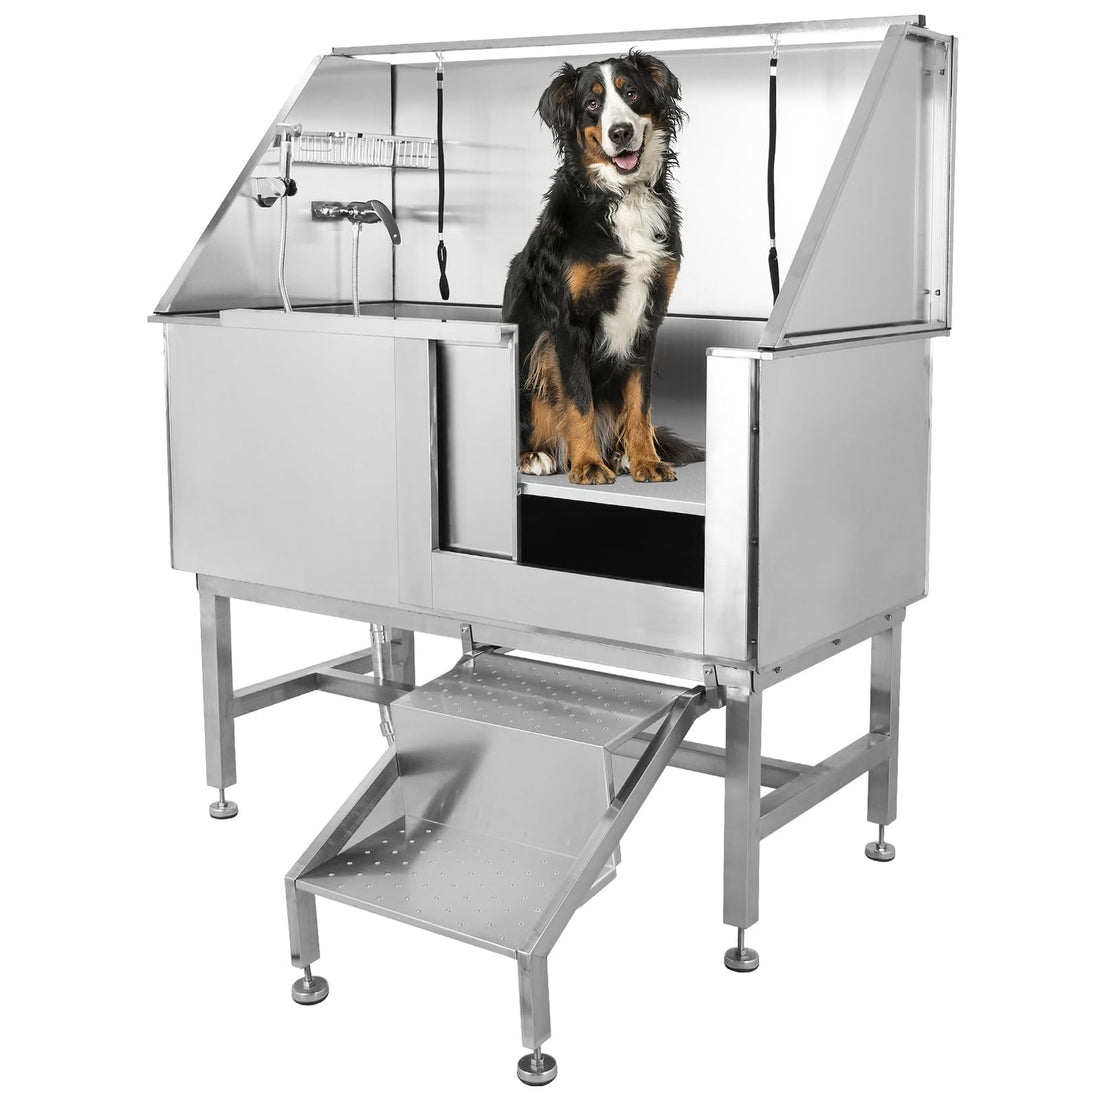 50 Inch Dog Grooming Tub, Professional Pet Wash Station